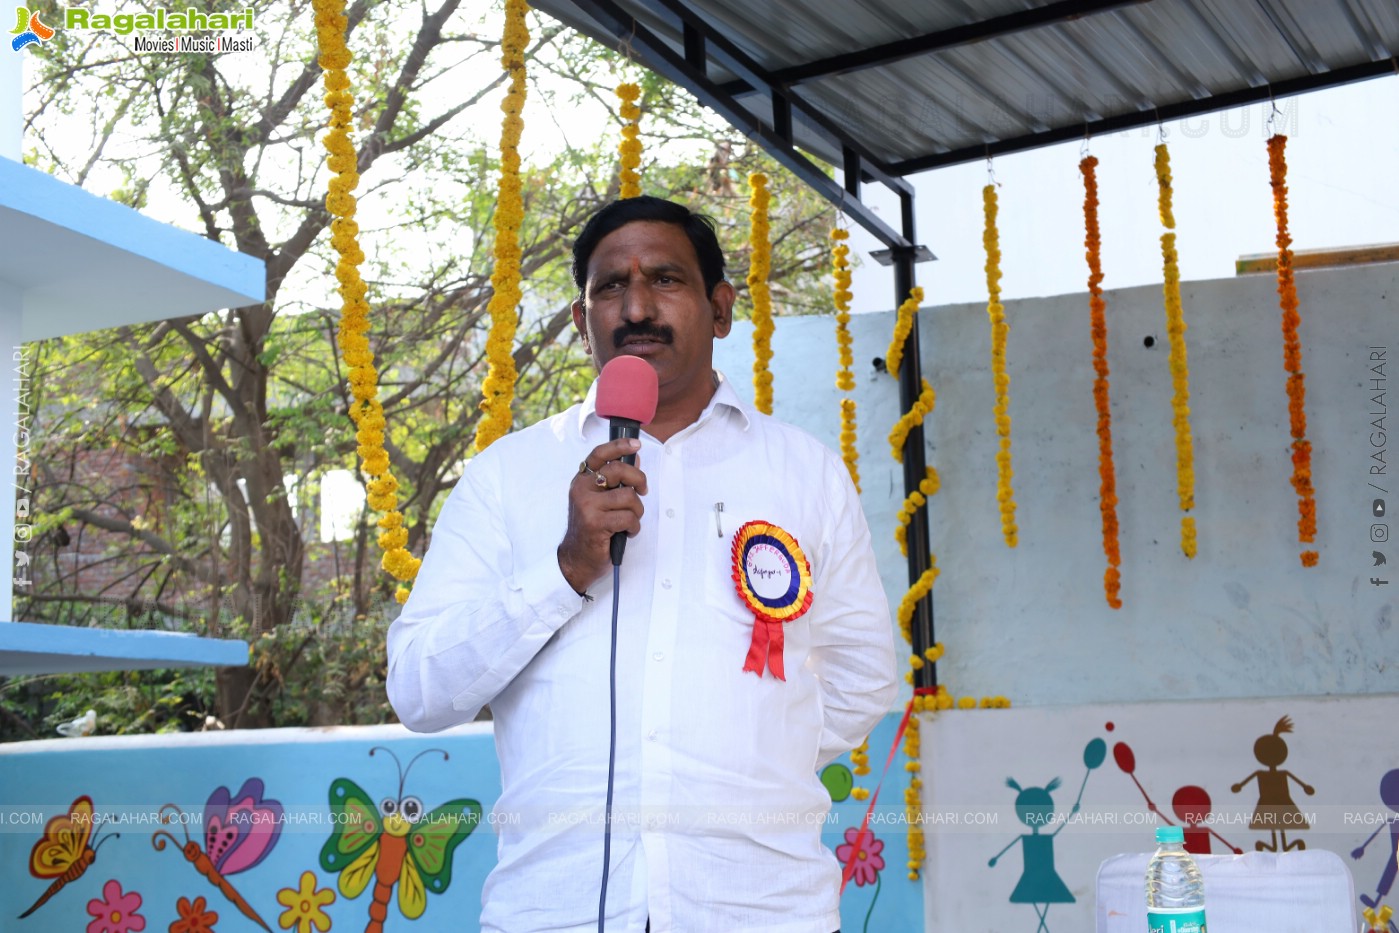 Grand Inauguration of the Development Works at Government Primary School, Hyderabad